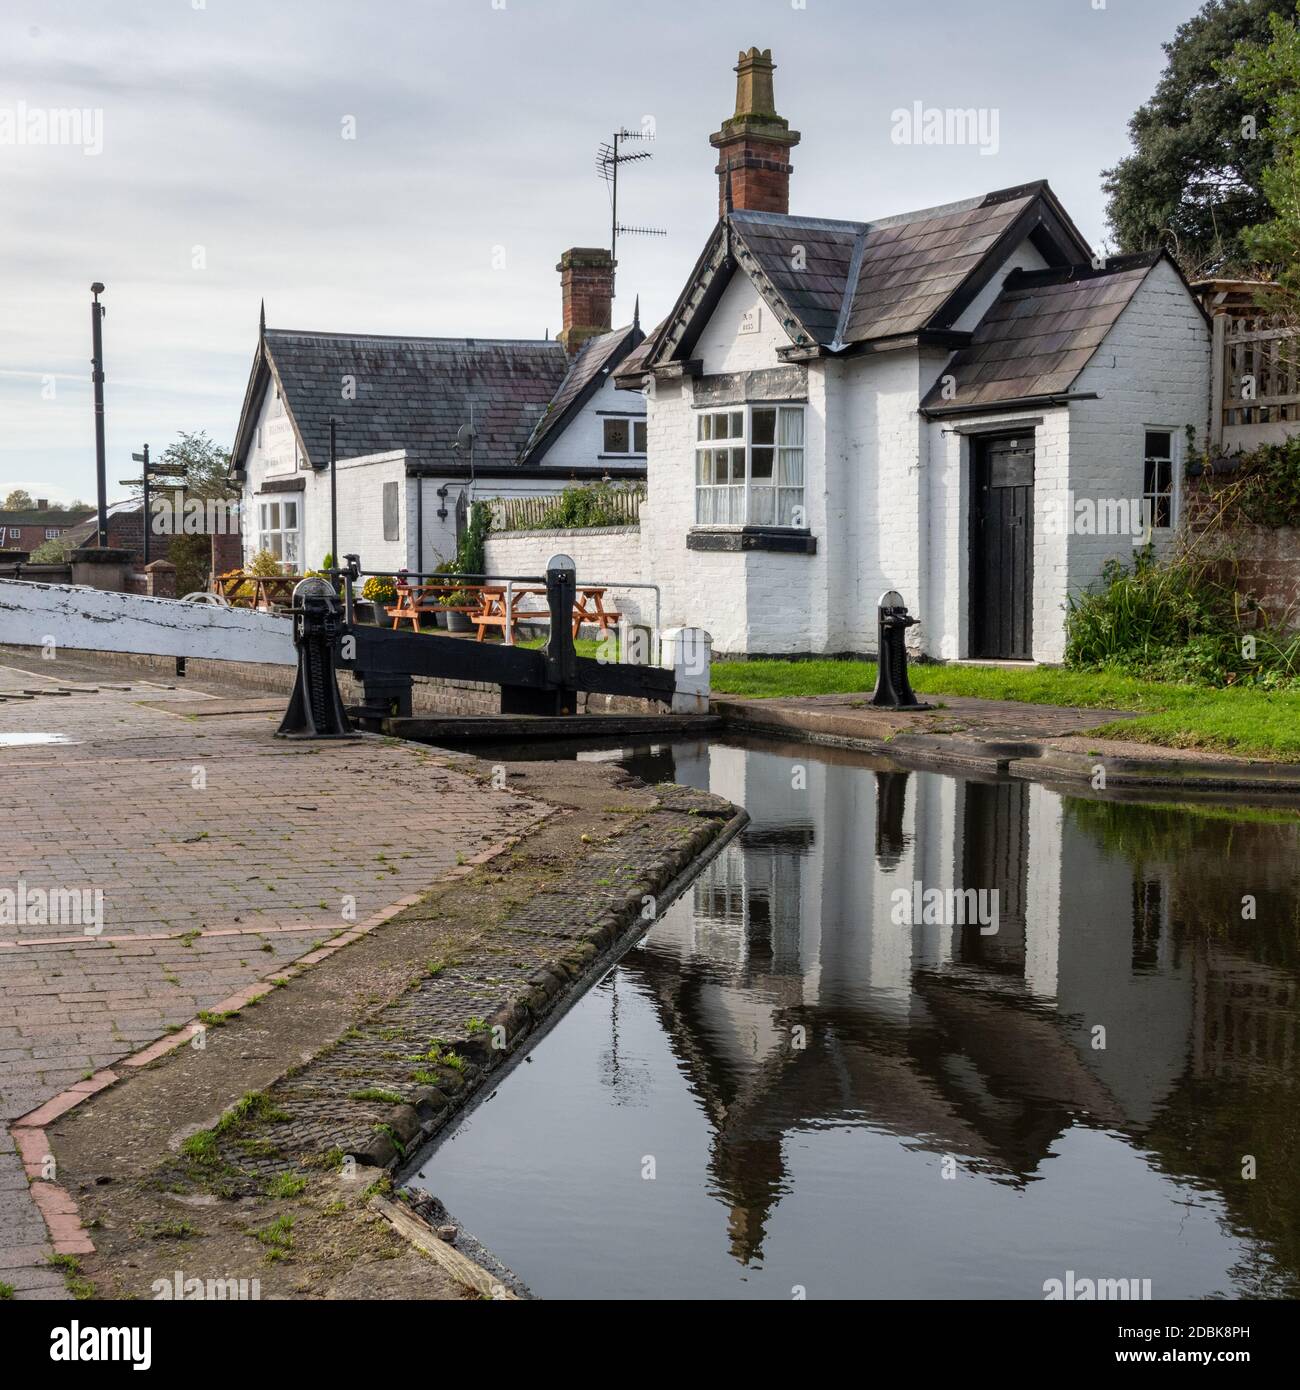 Canal Lock House in Stourport auf Severn, Worcestershire, England Stockfoto